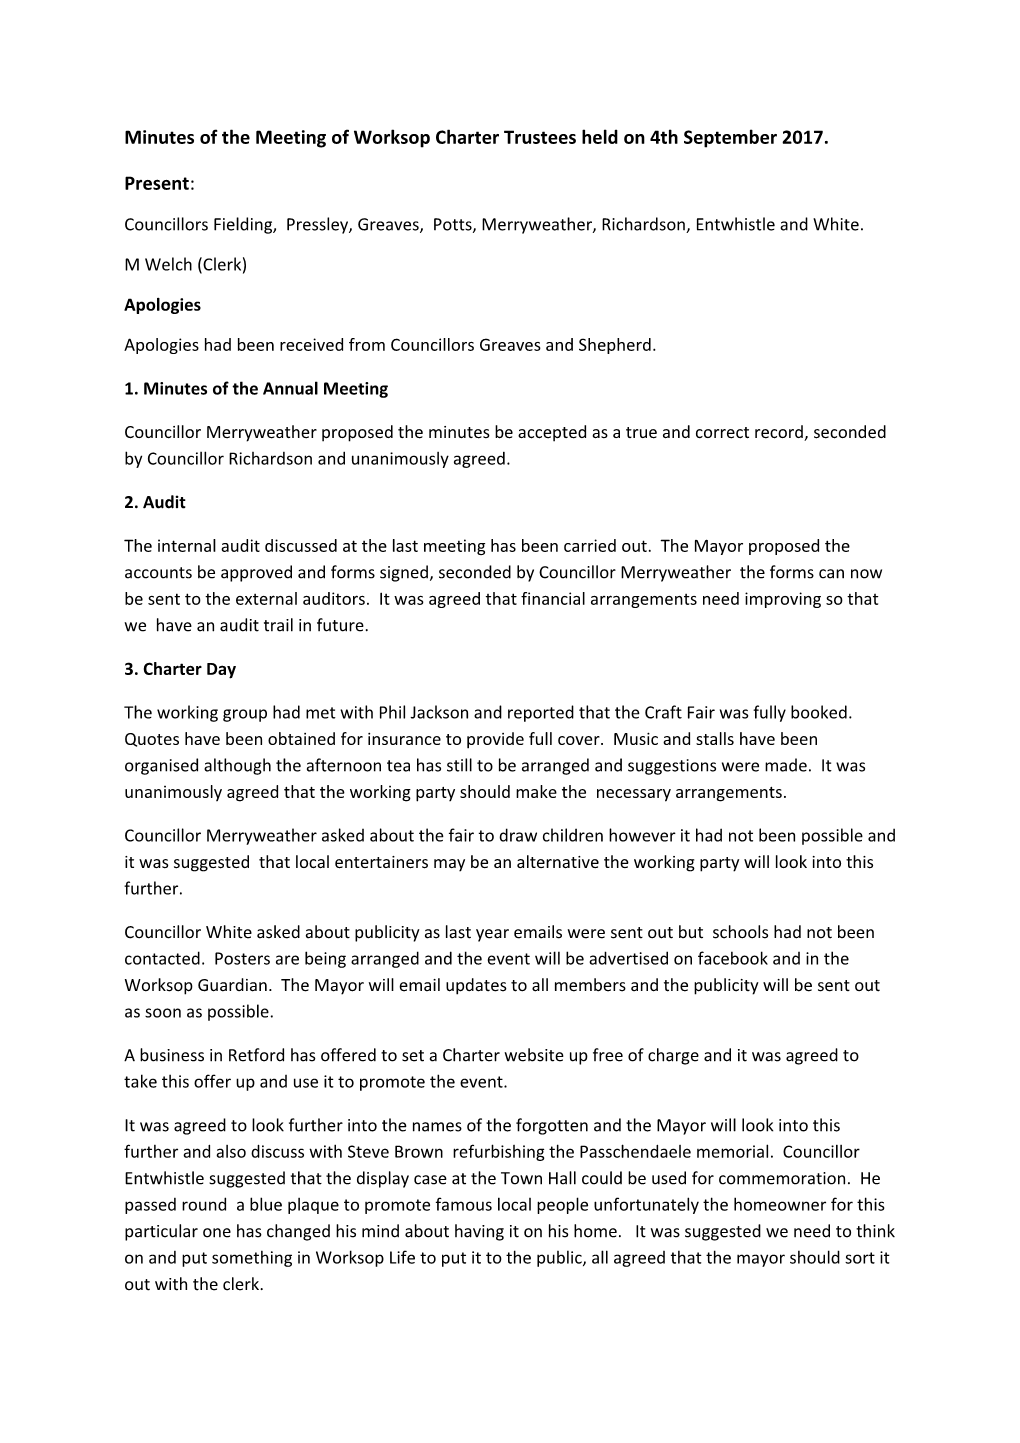 Minutes of the Meeting of Worksop Charter Trustees Held on 4Th September 2017